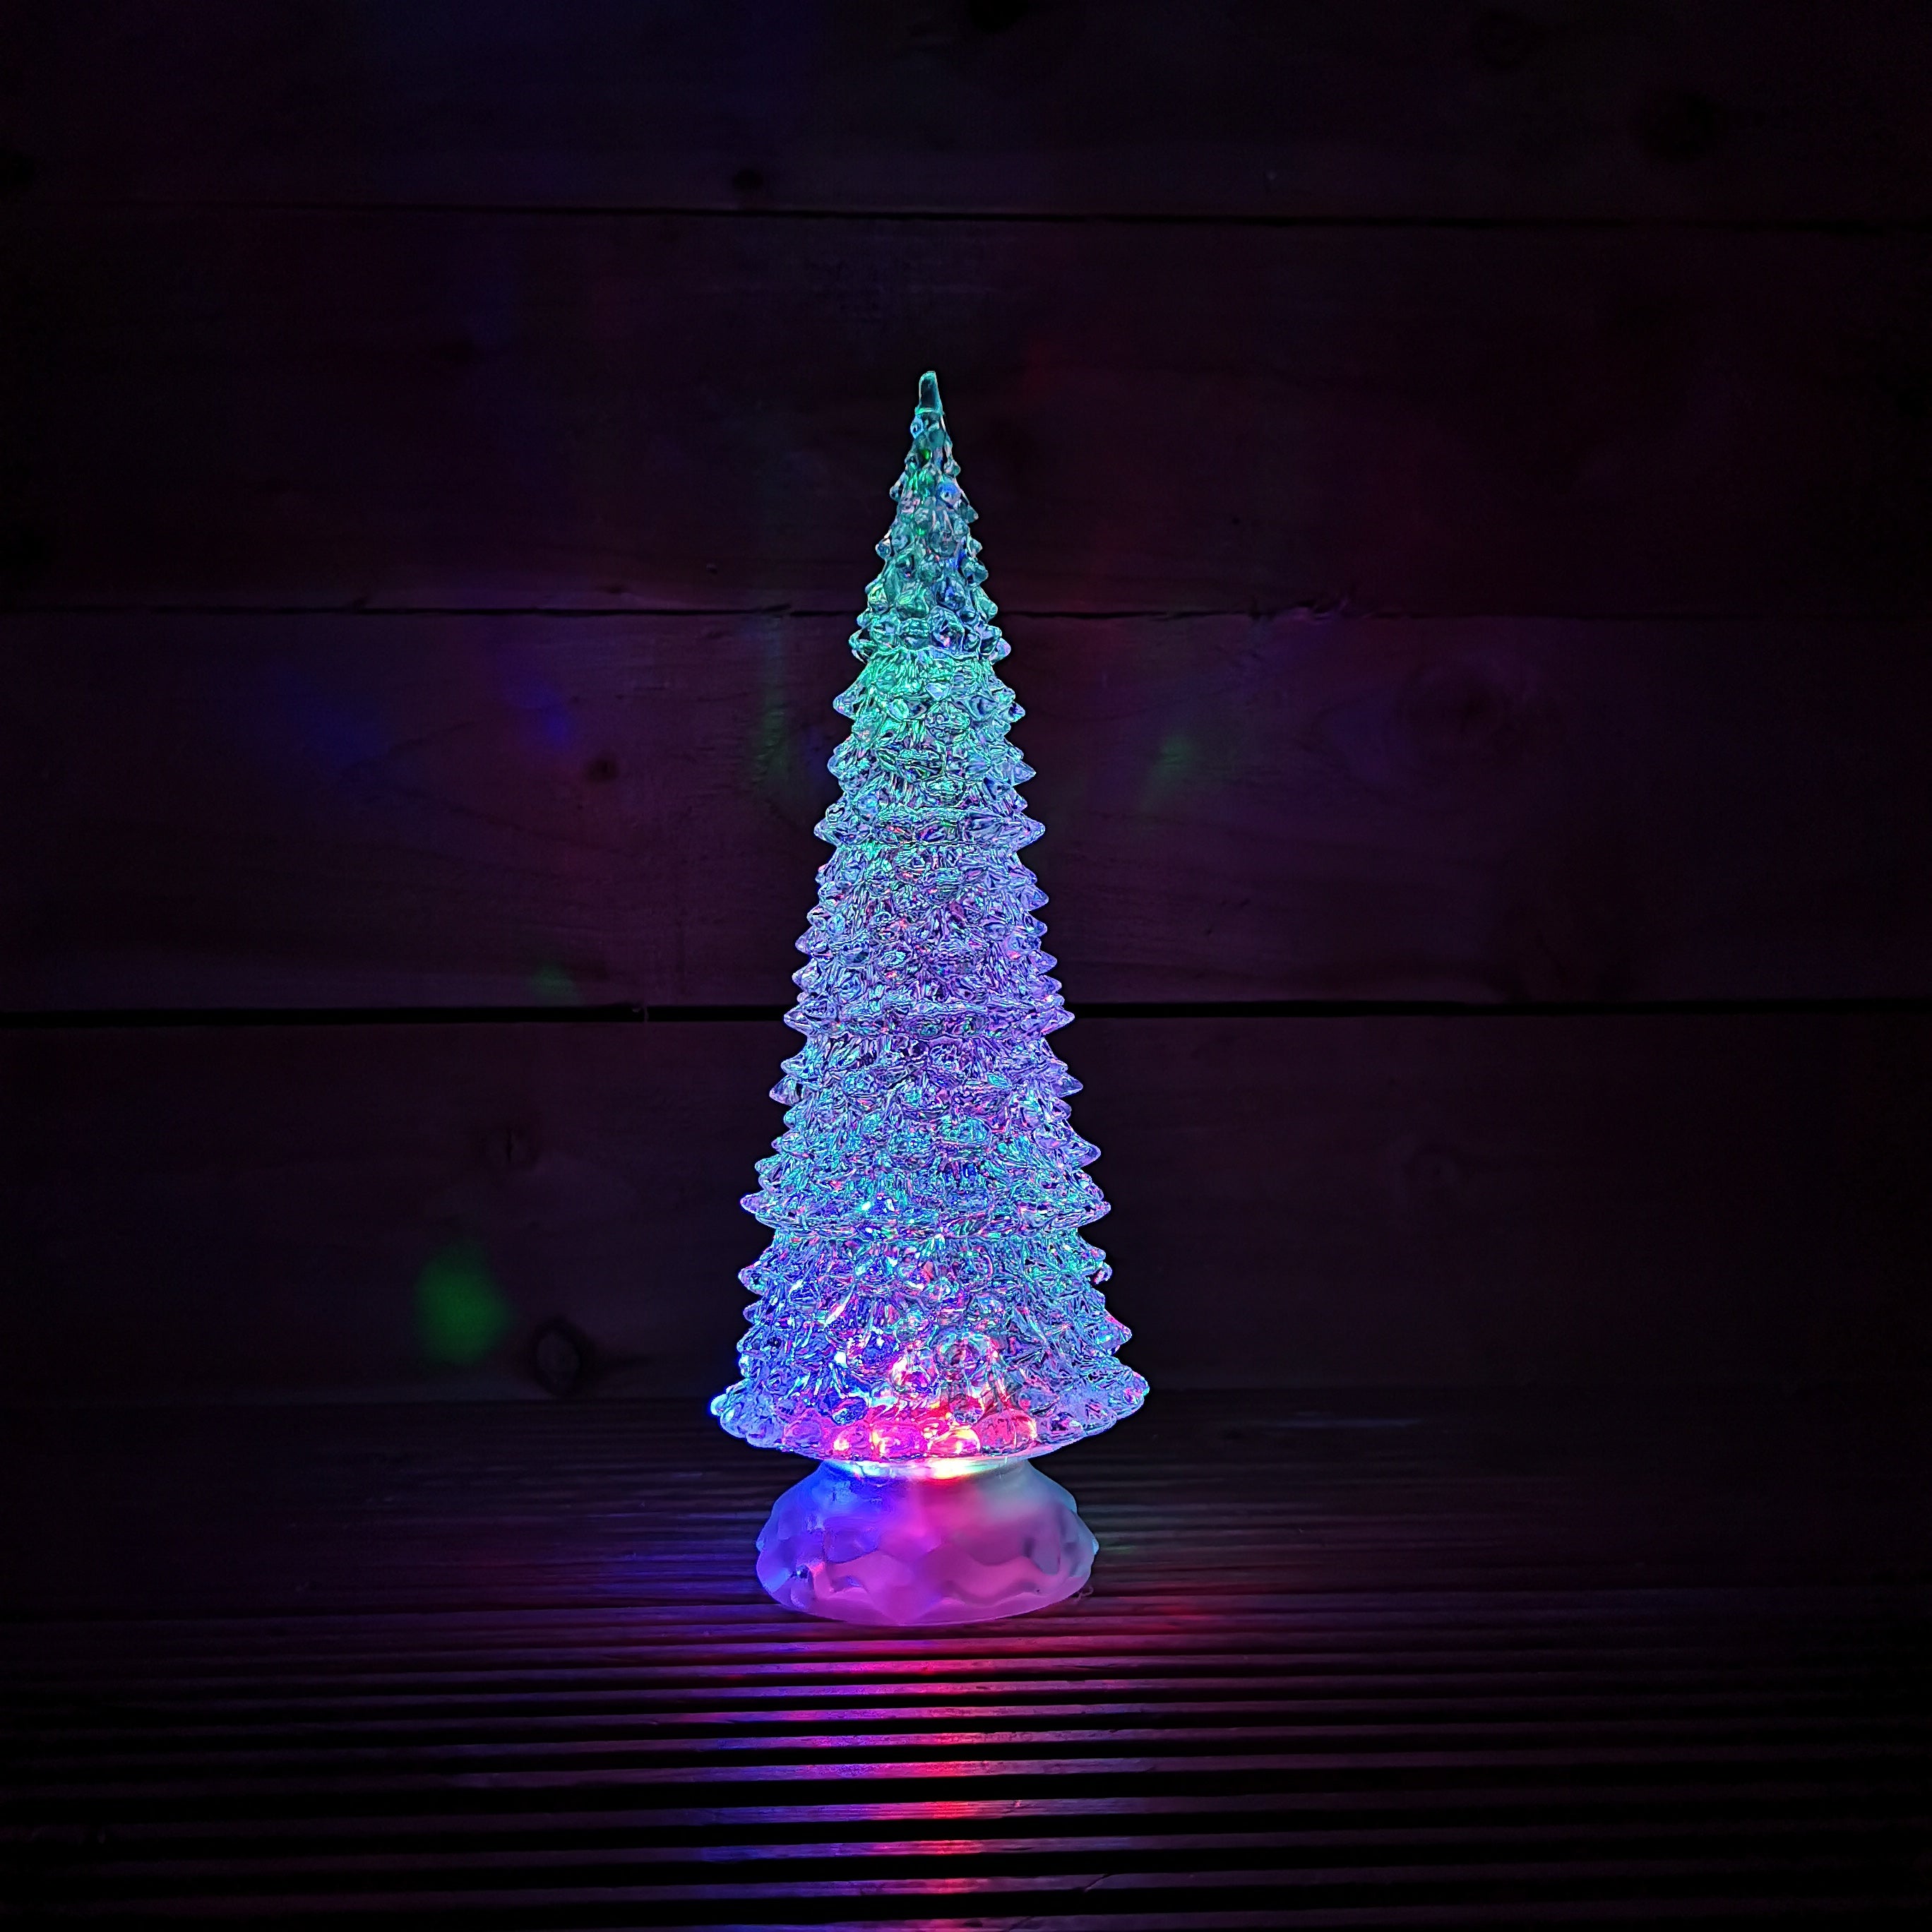 30cm Dual Power Water Spinner Christmas Tree with Timer & Colour Changing LED's